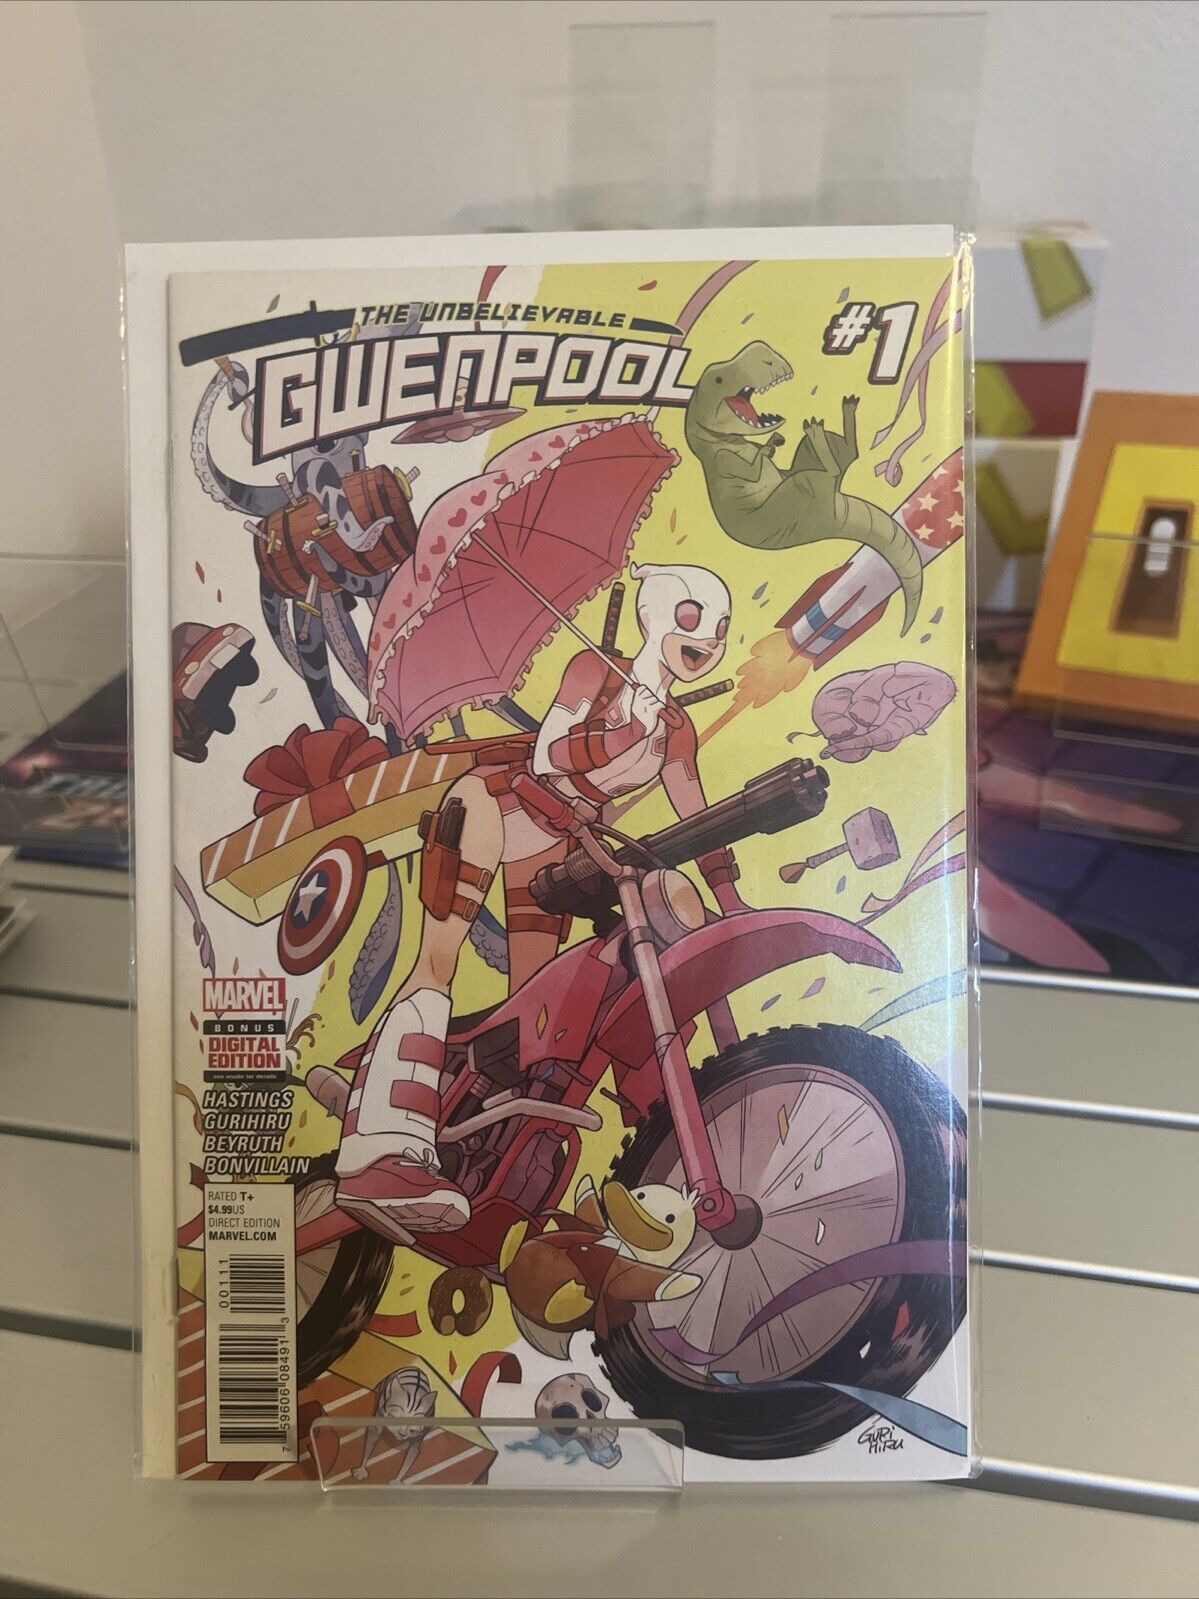 The Unbelievable Gwenpool #1 2016 VF+ 1st Solo Title